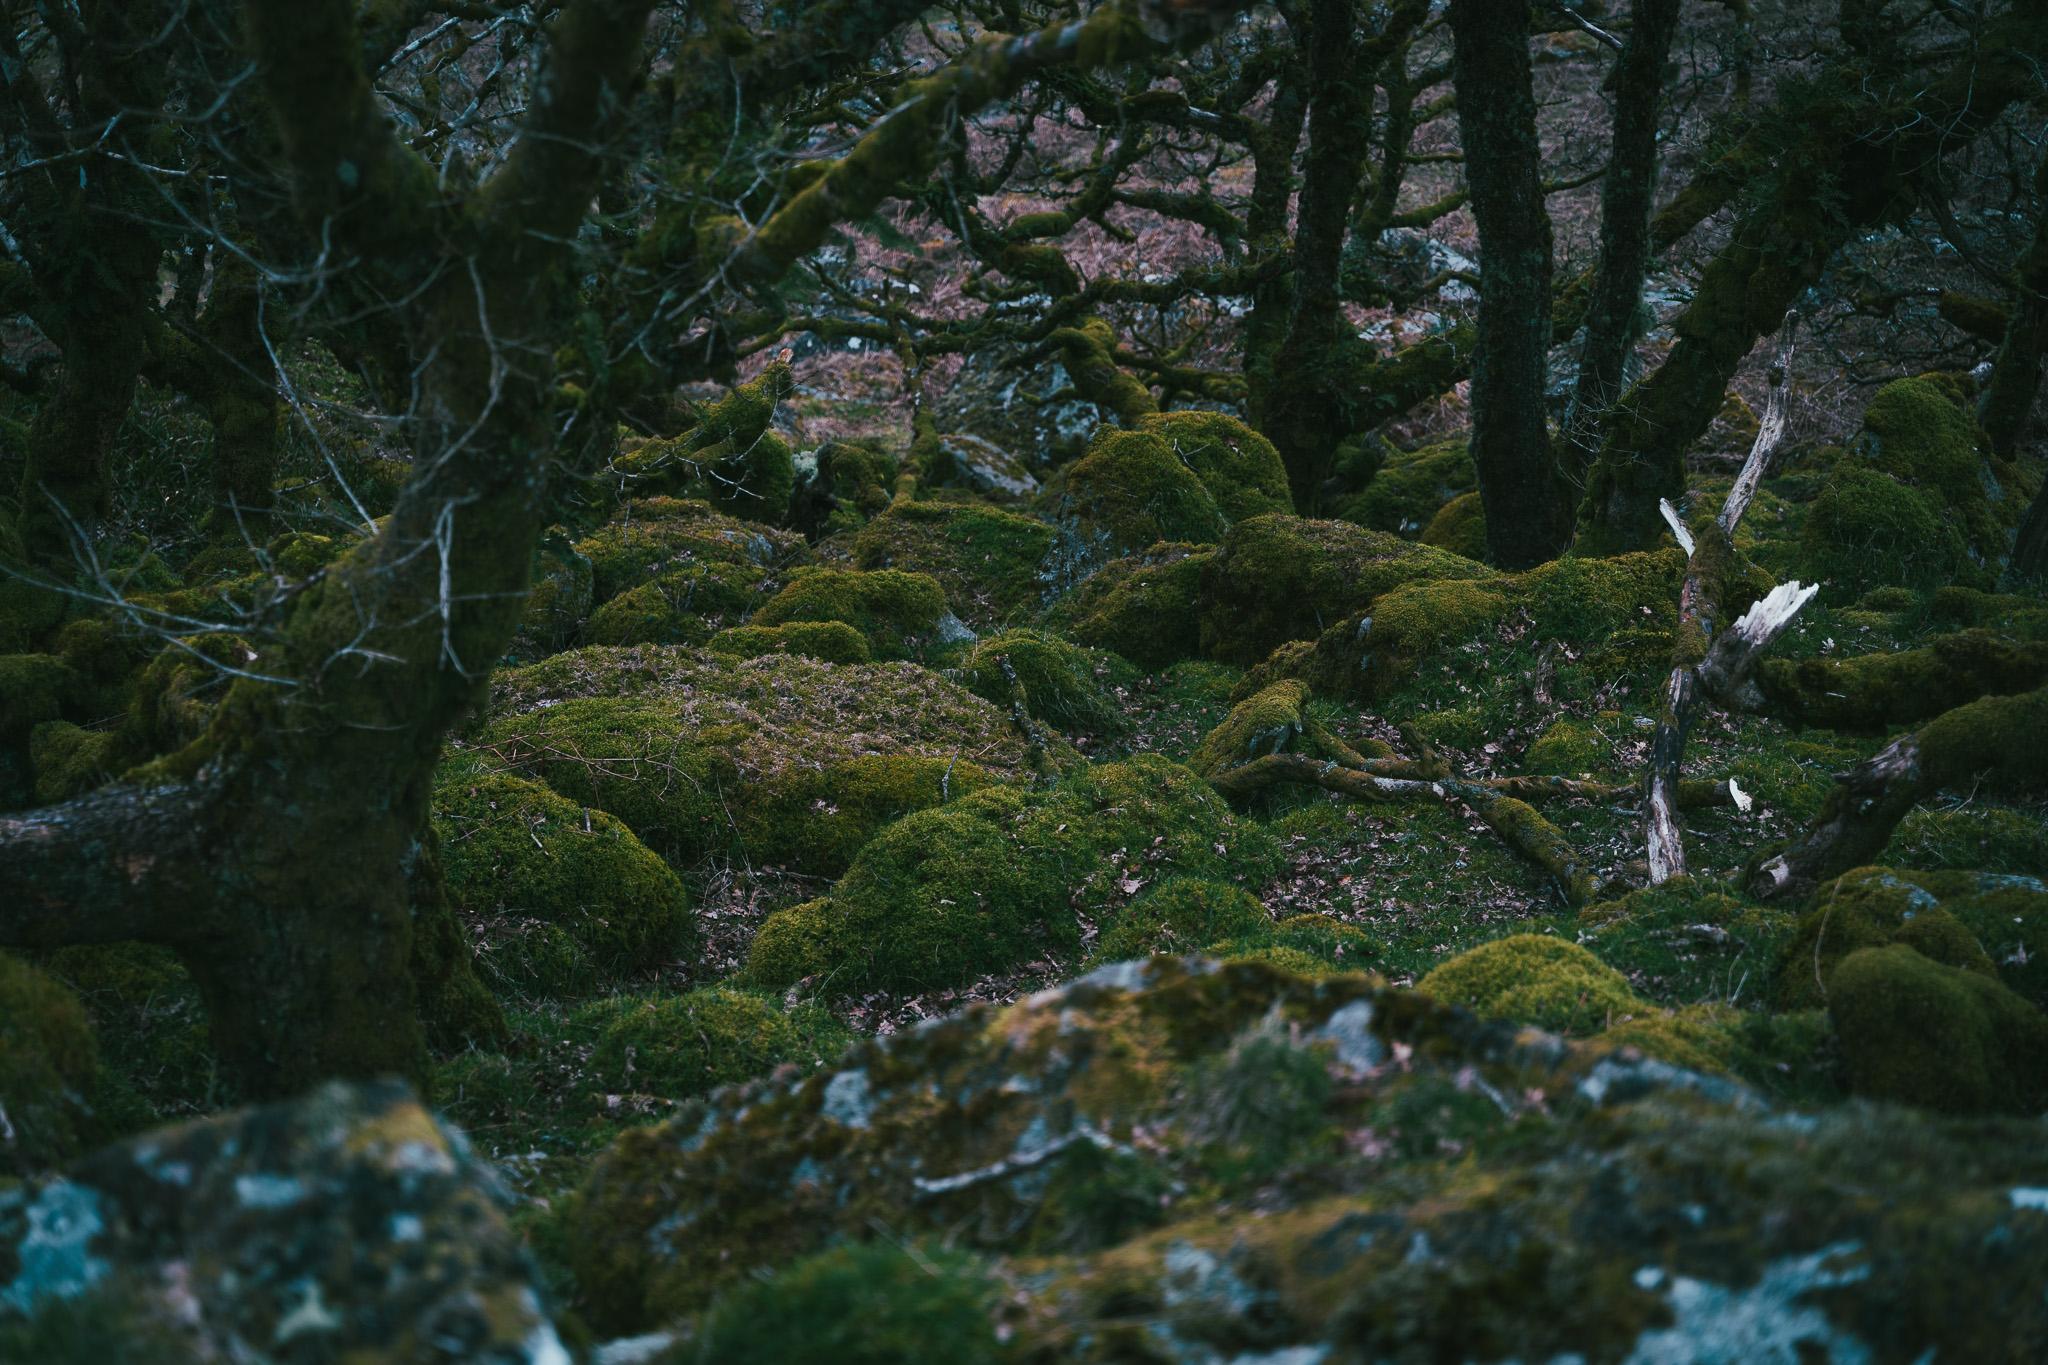 A photo from Wistman's Wood at Dartmoor National Park, Devon, UK